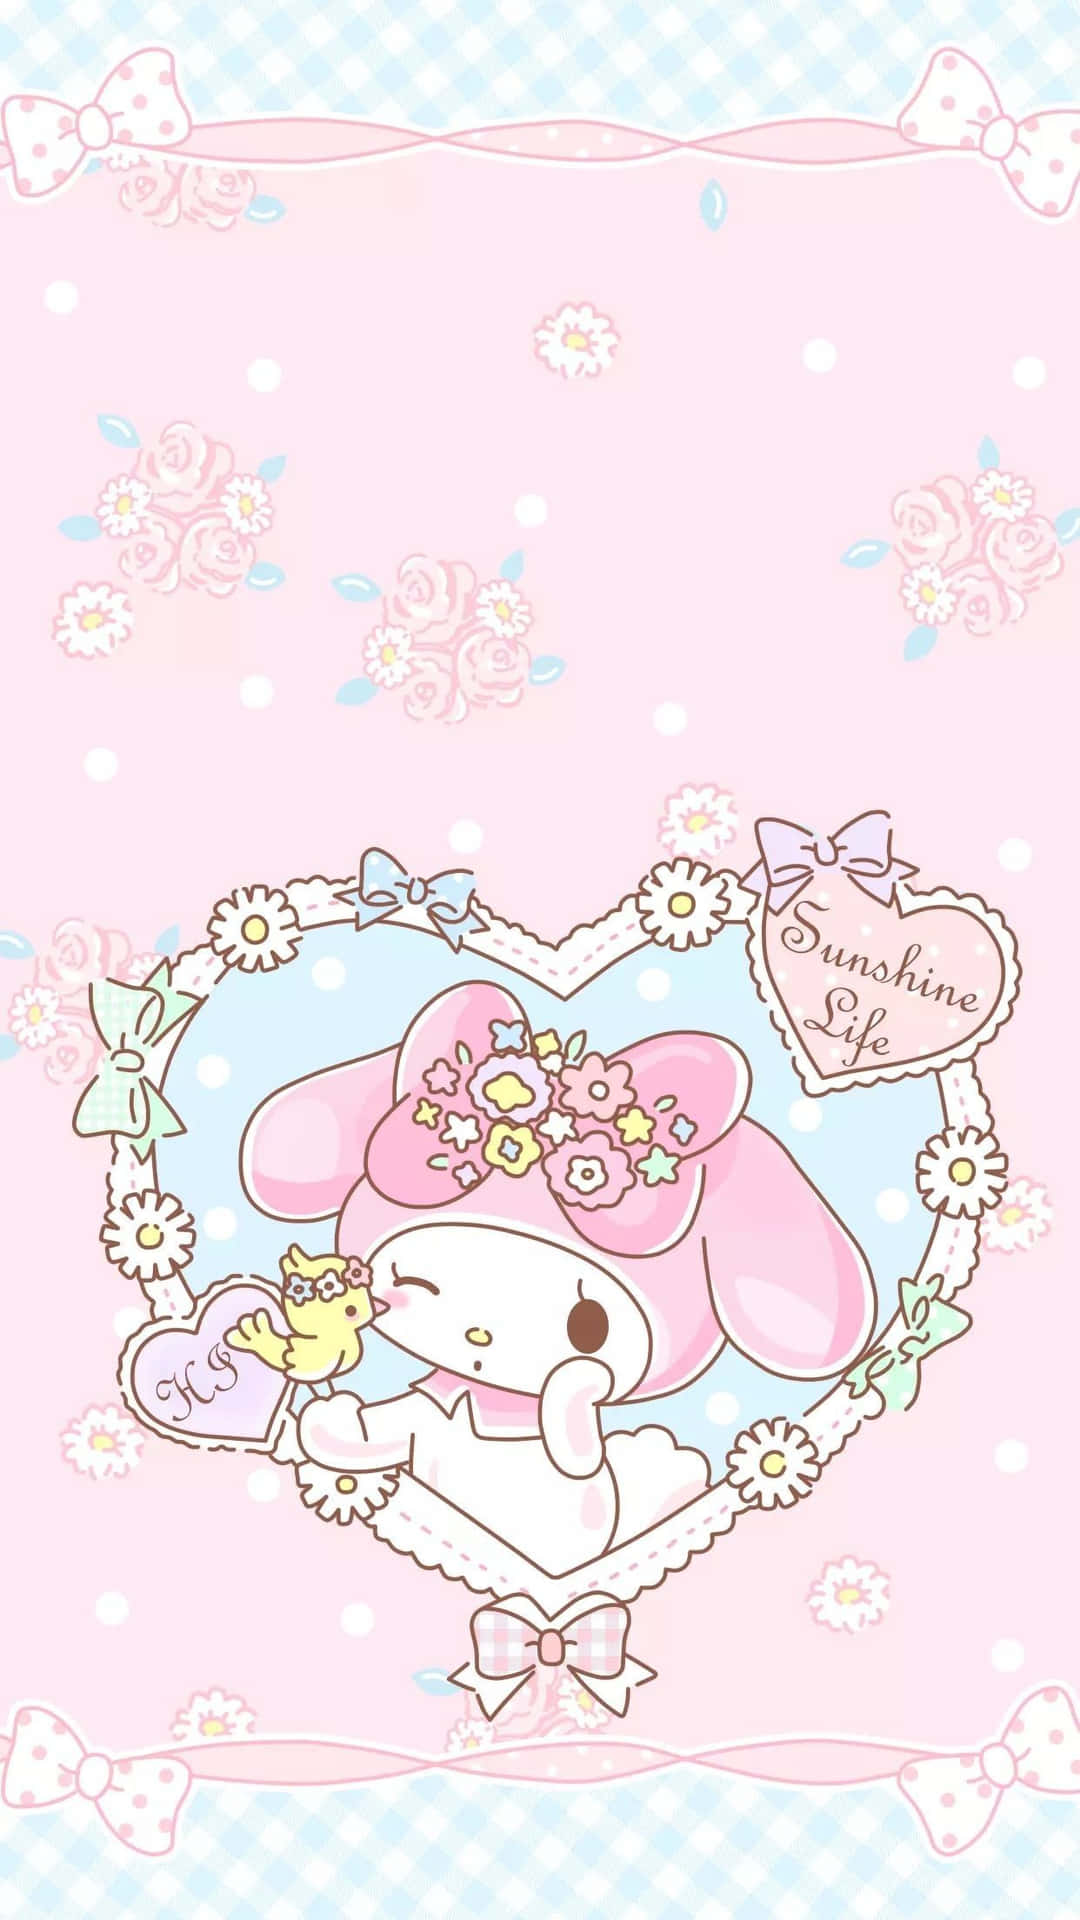 Adorable Sanrio Characters Background.